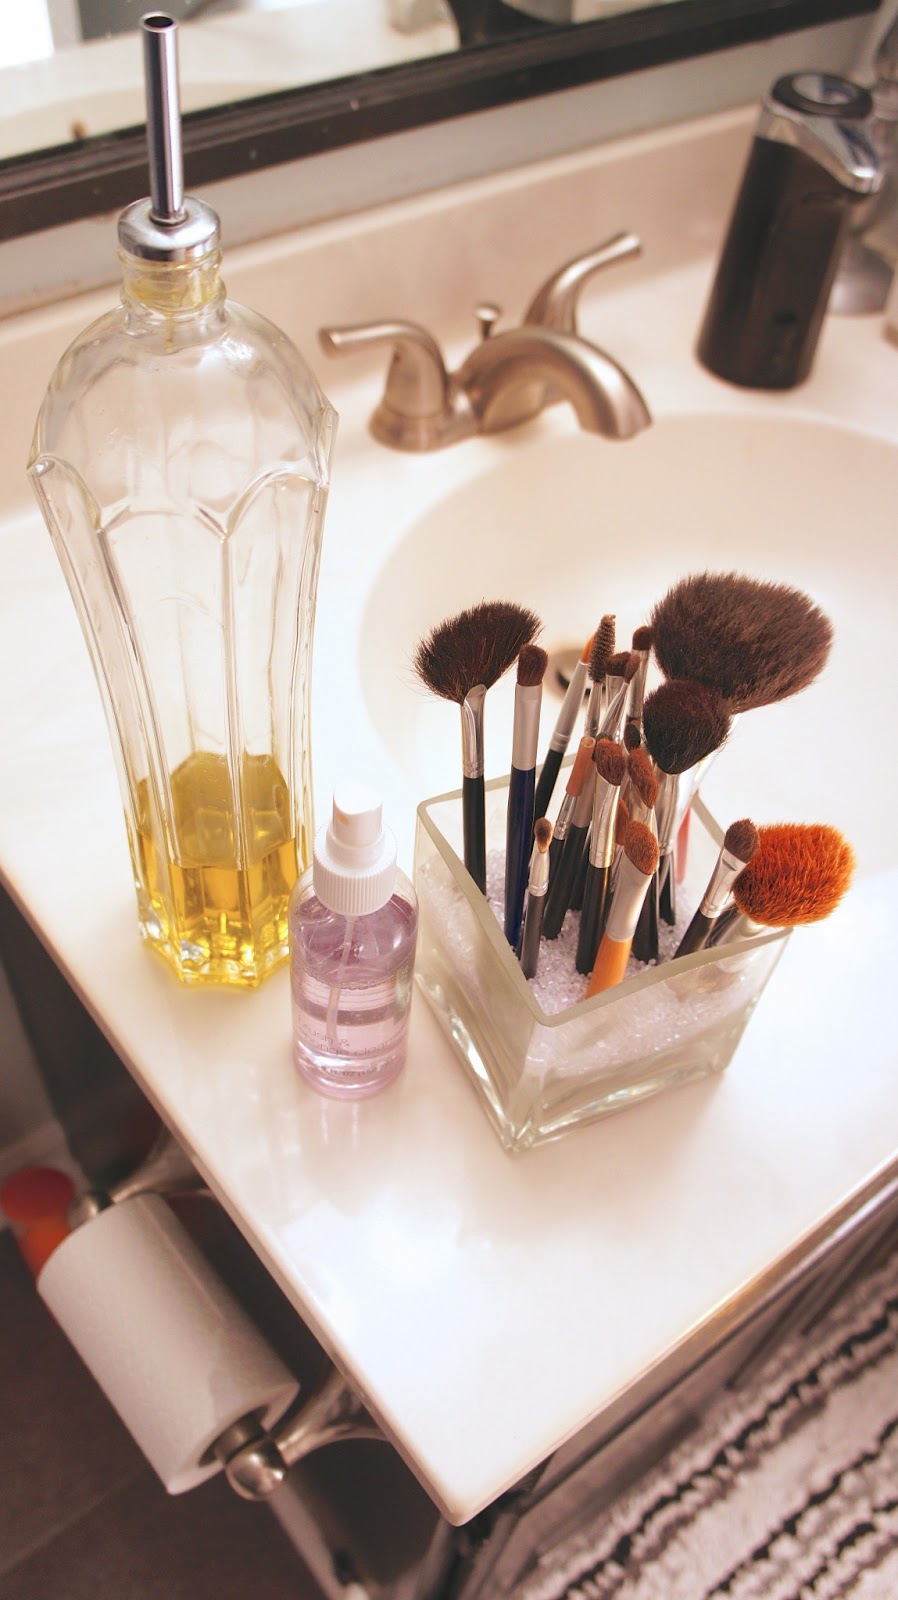 How to Clean Makeup Brushes at Home Like a Pro